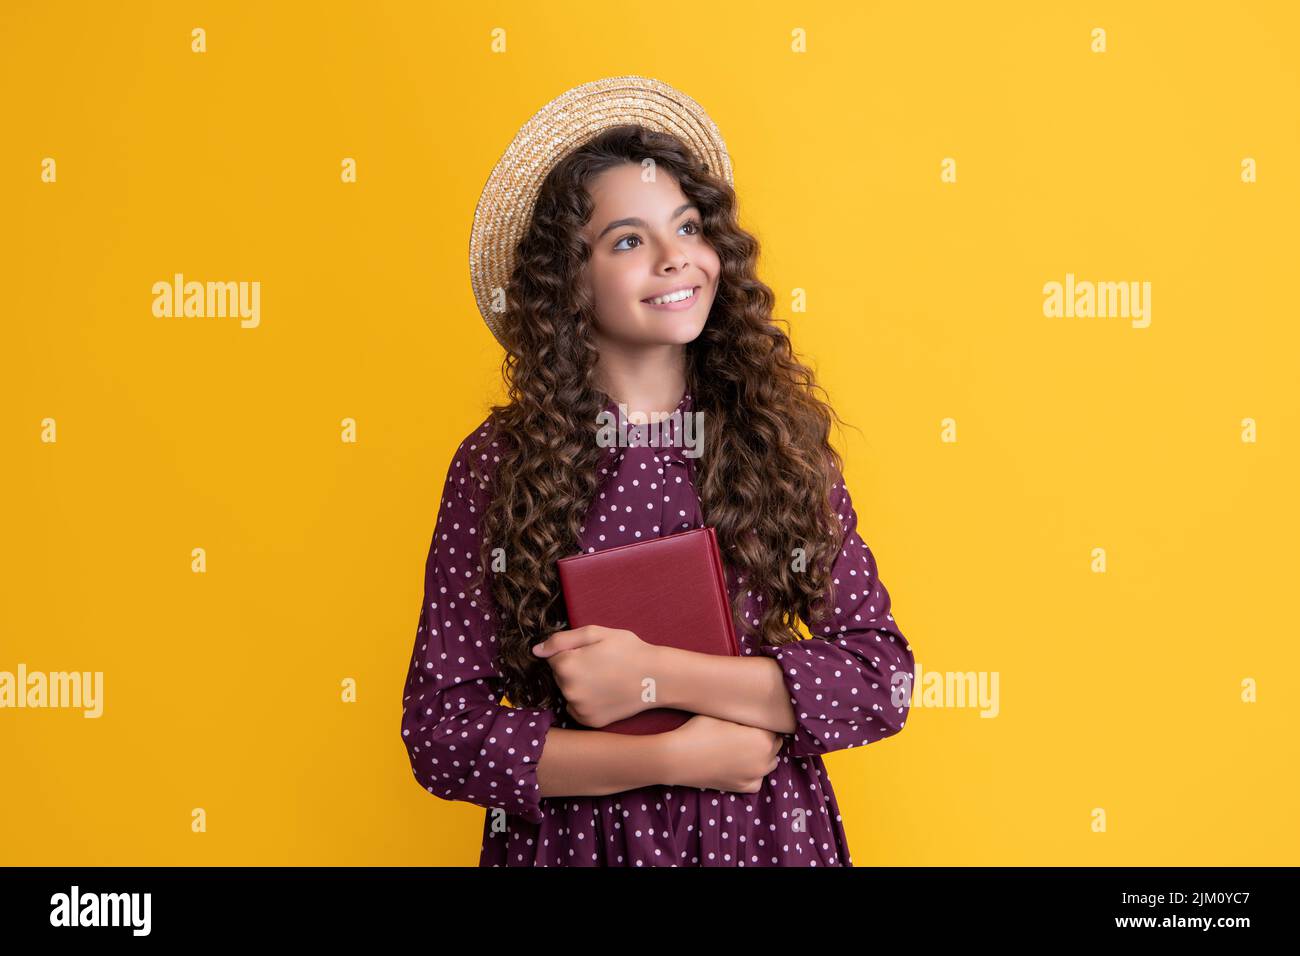 cheerful kid with frizz hair hold book on yellow background Stock Photo